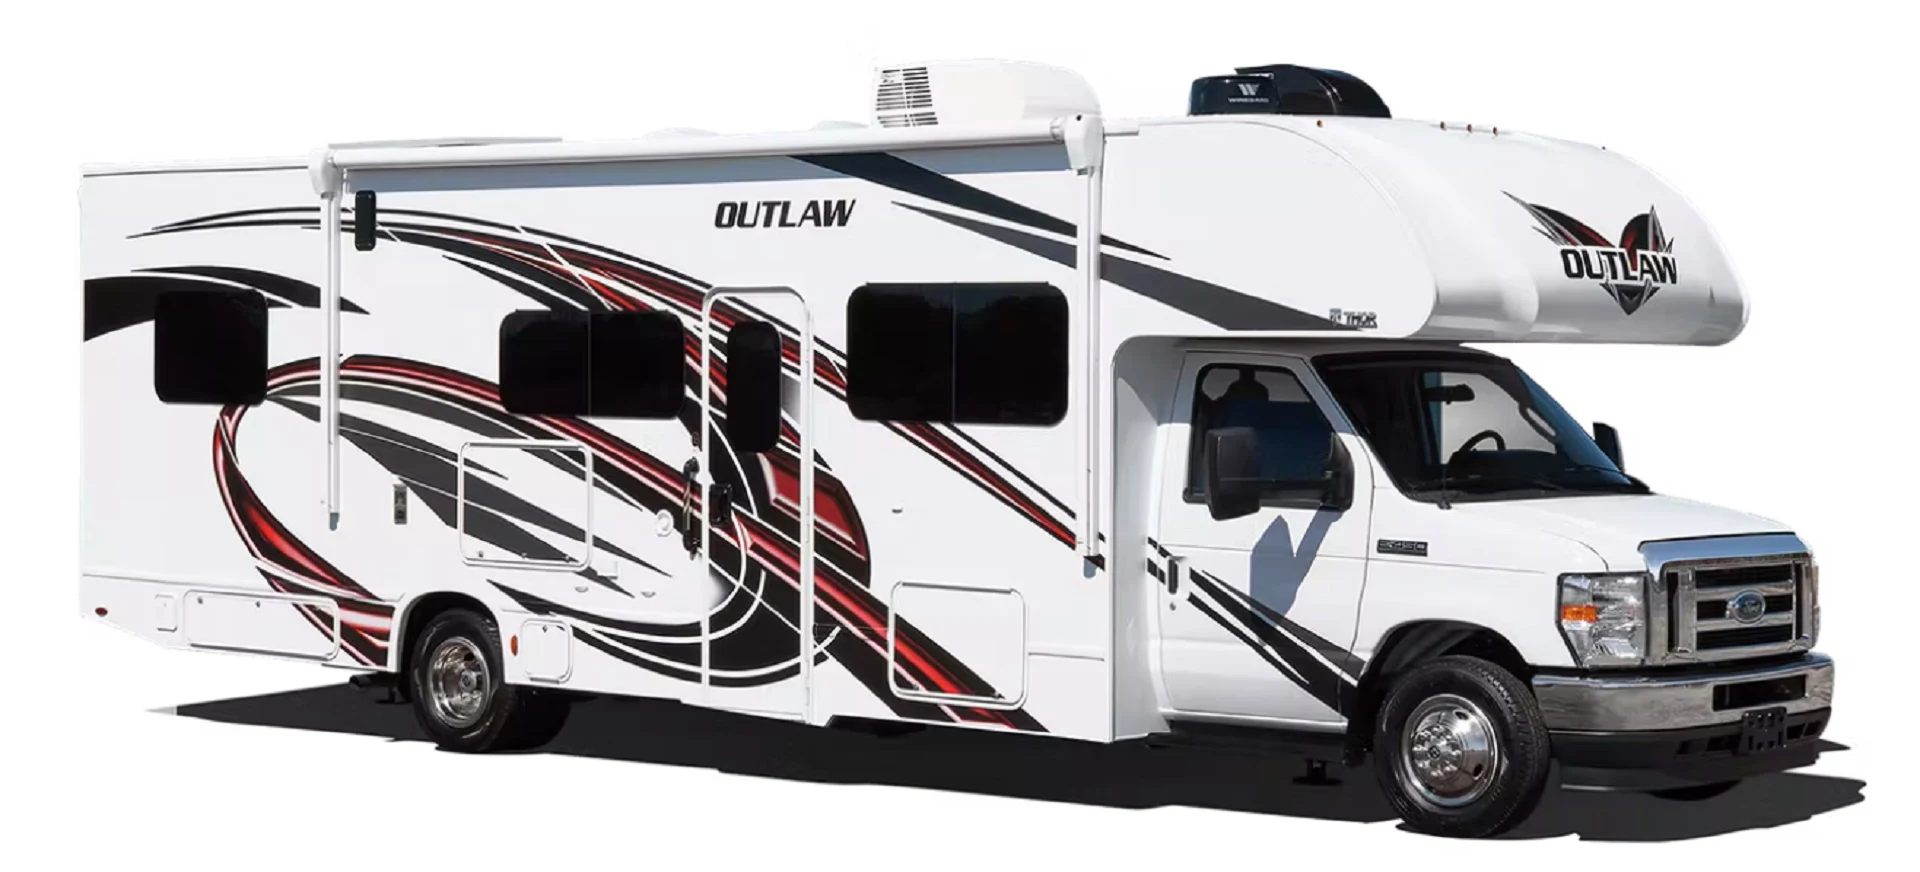 The 2023 Thor Outlaw Class C toy hauler motorhome